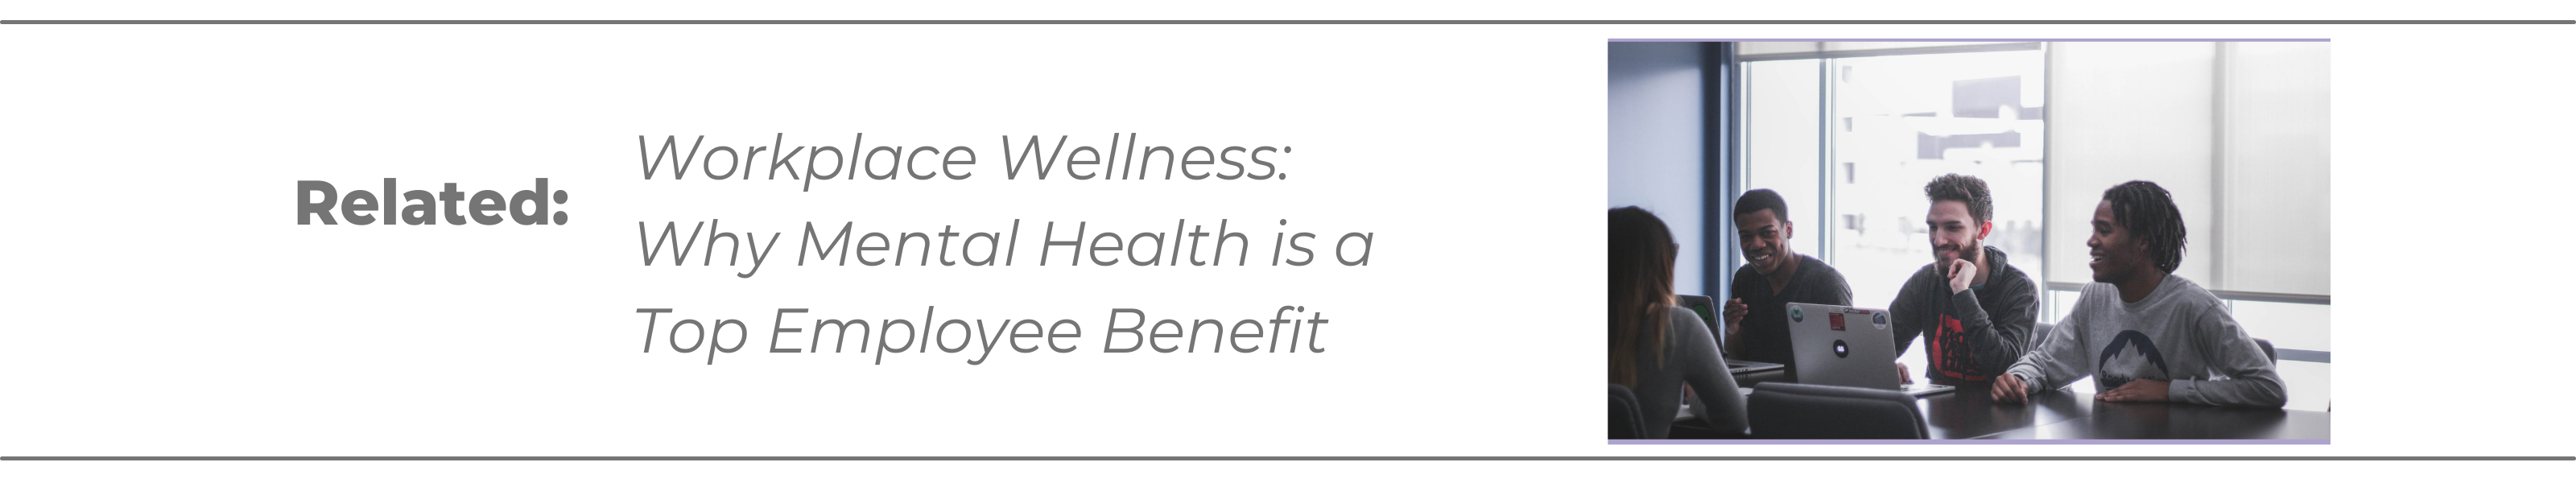 related blog - workplace wellness benefits